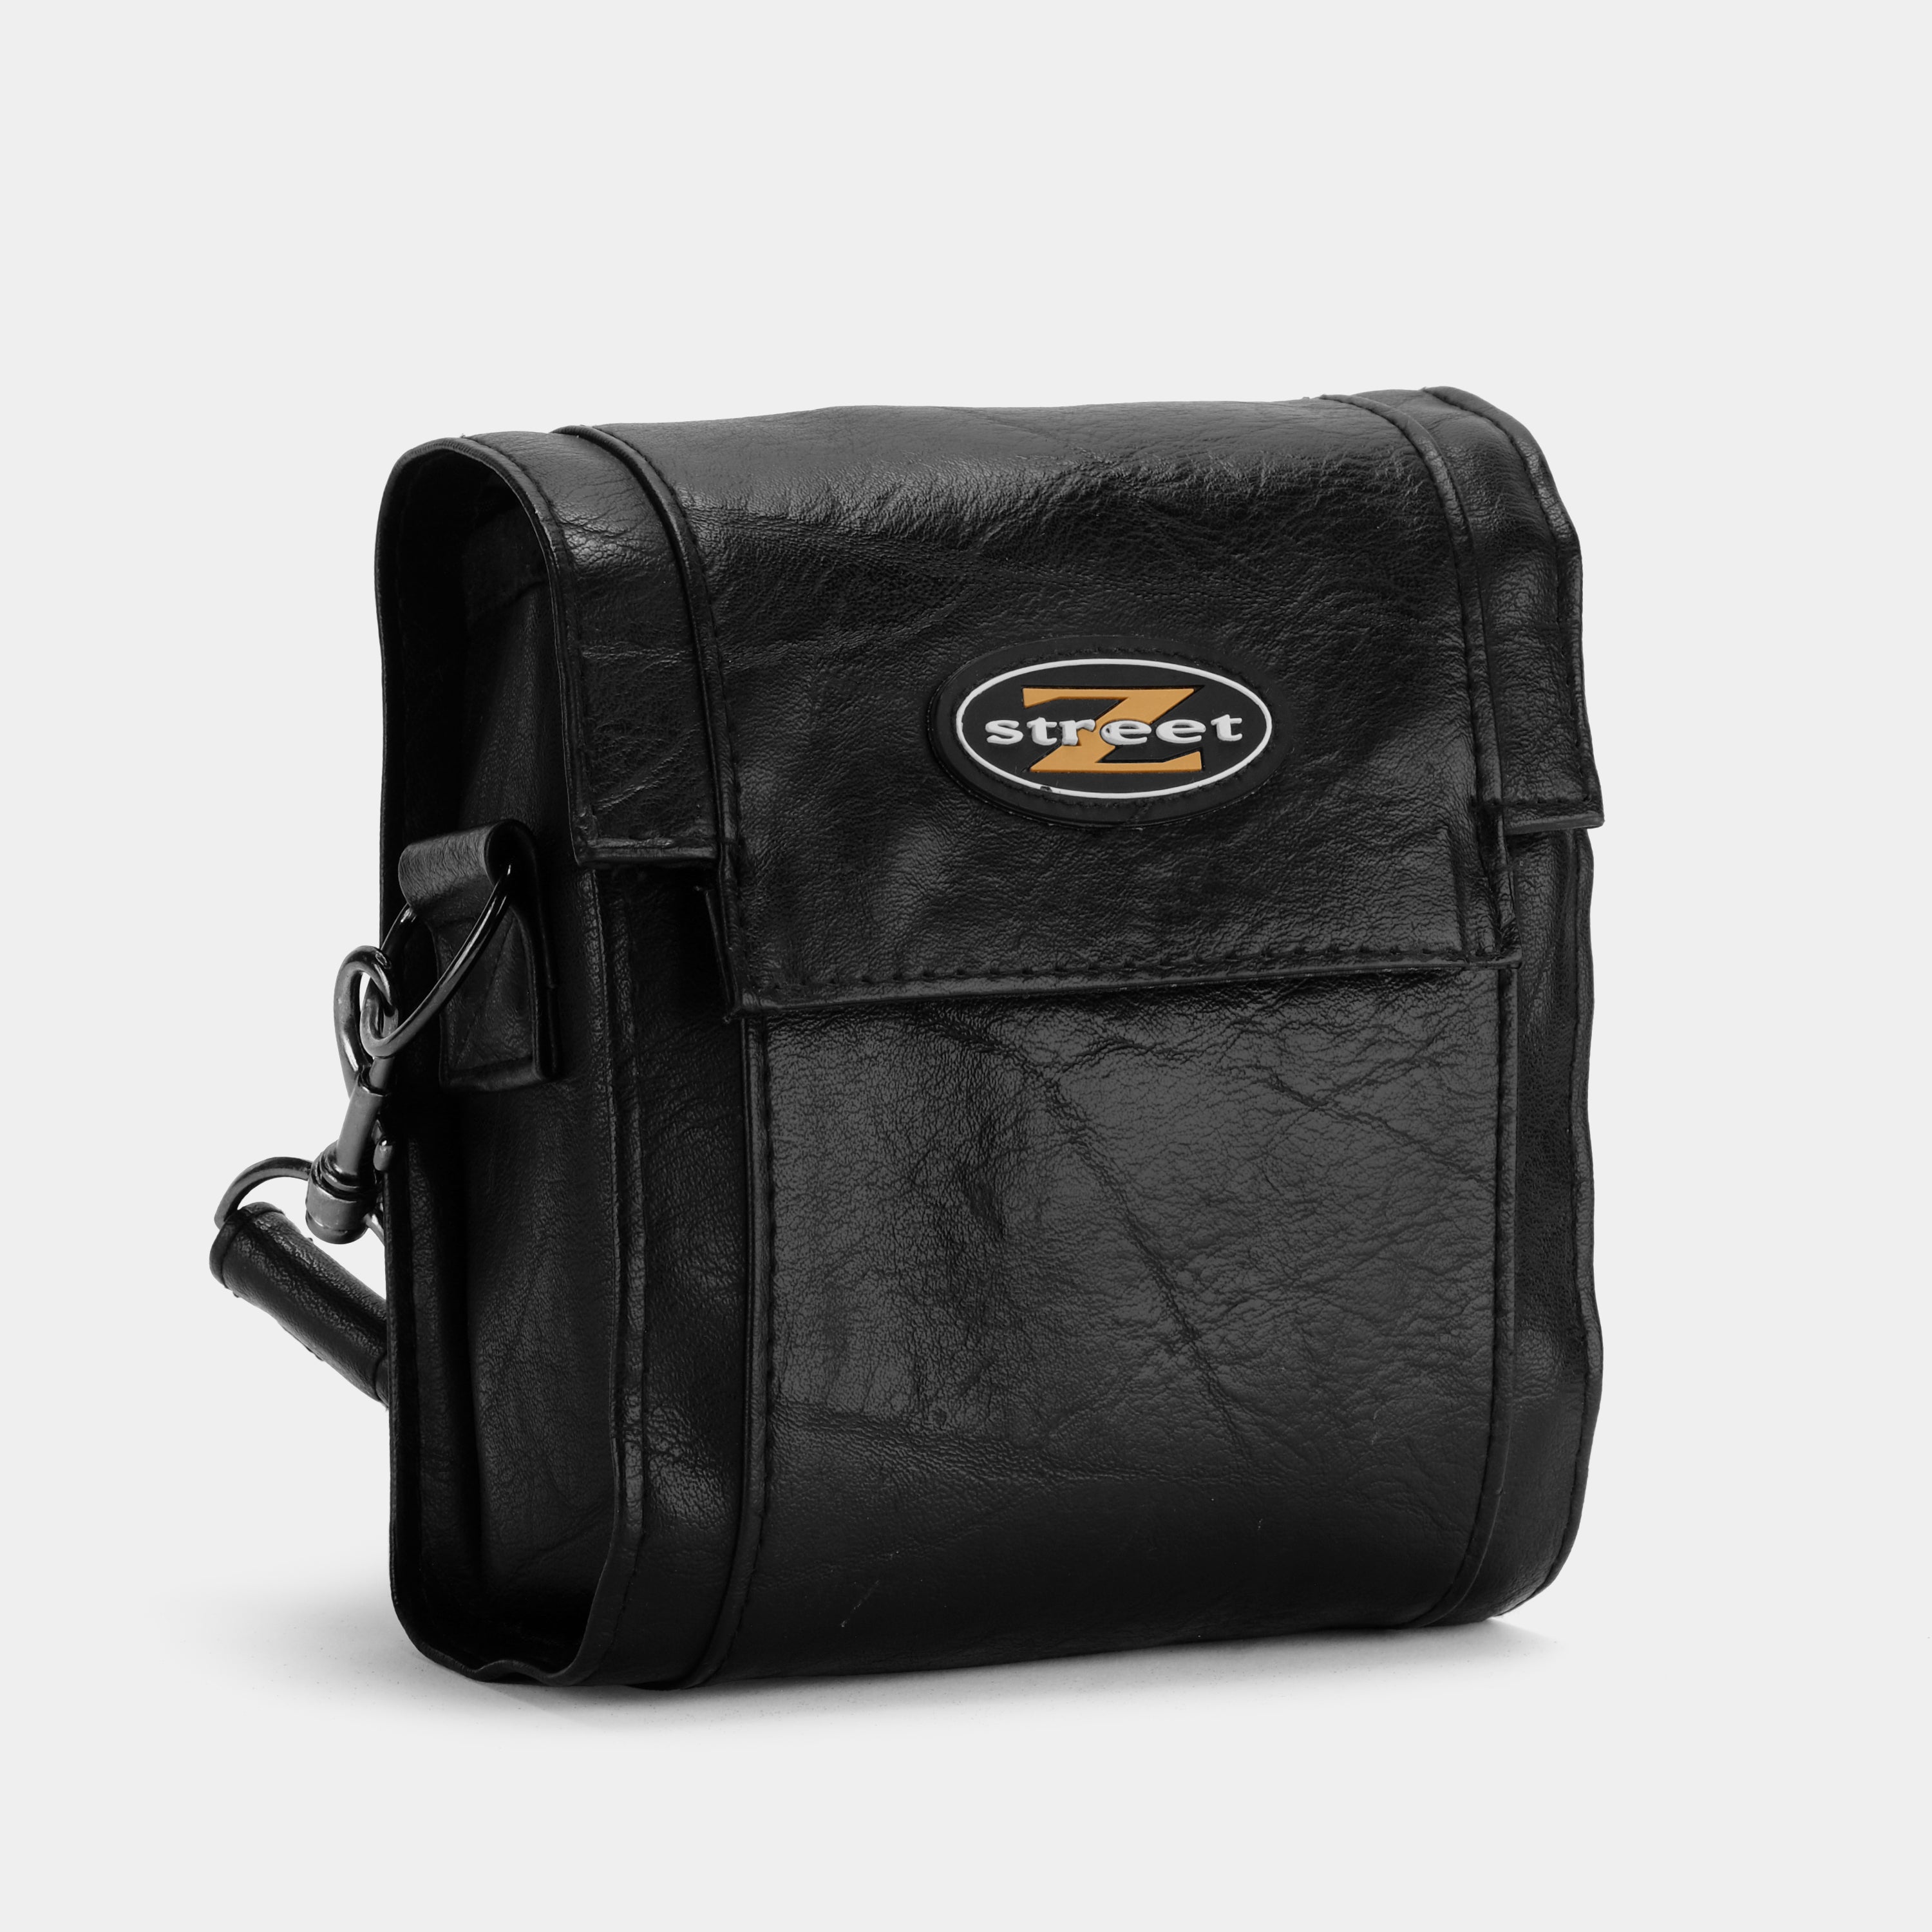 Street Z Faux Leather CD Player Bag